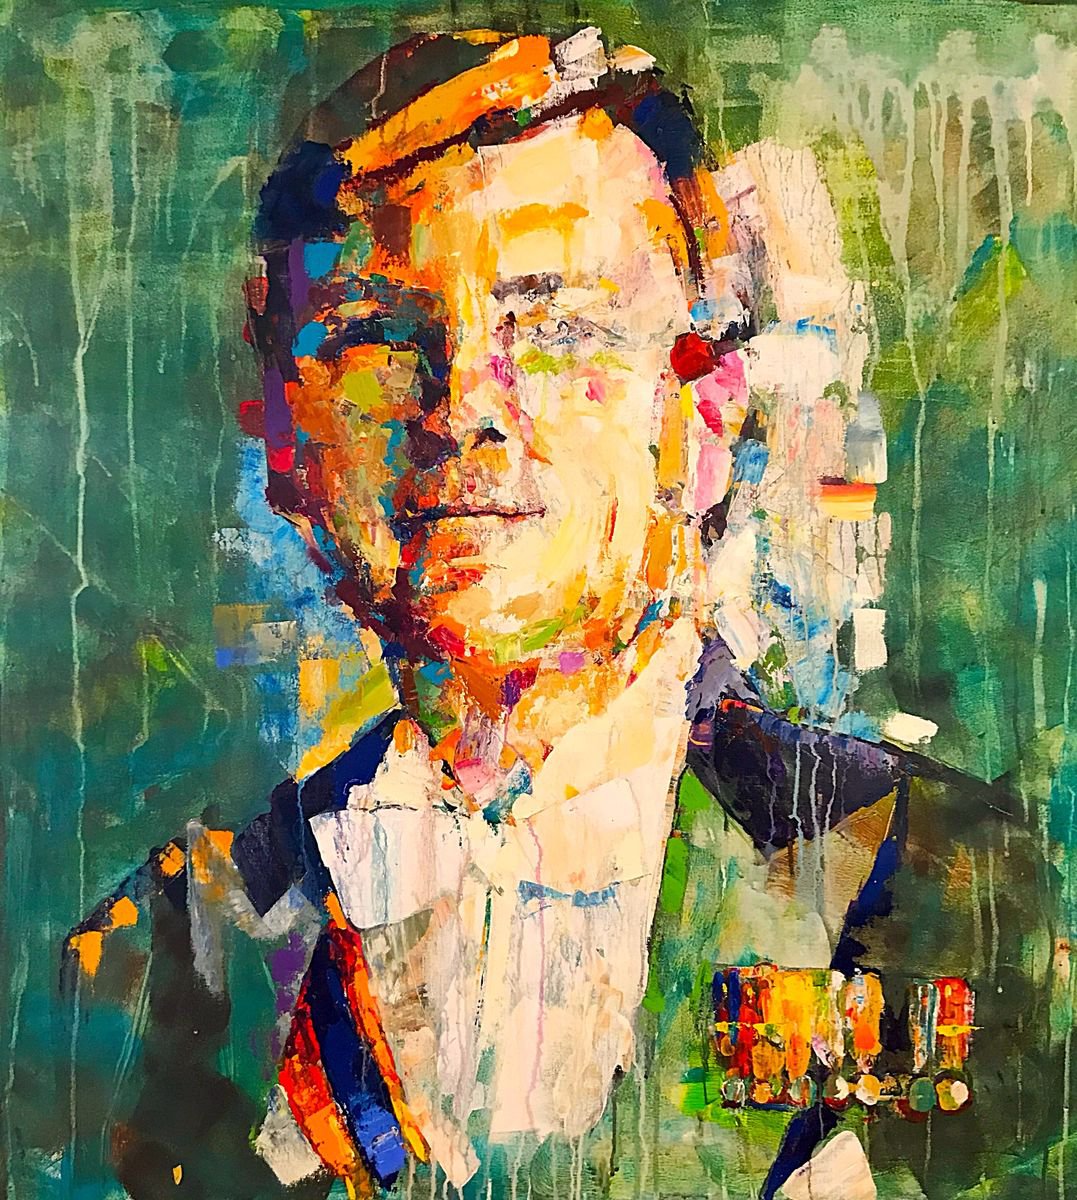 Willem Alexander, King of The Netherlands by Paul Arts